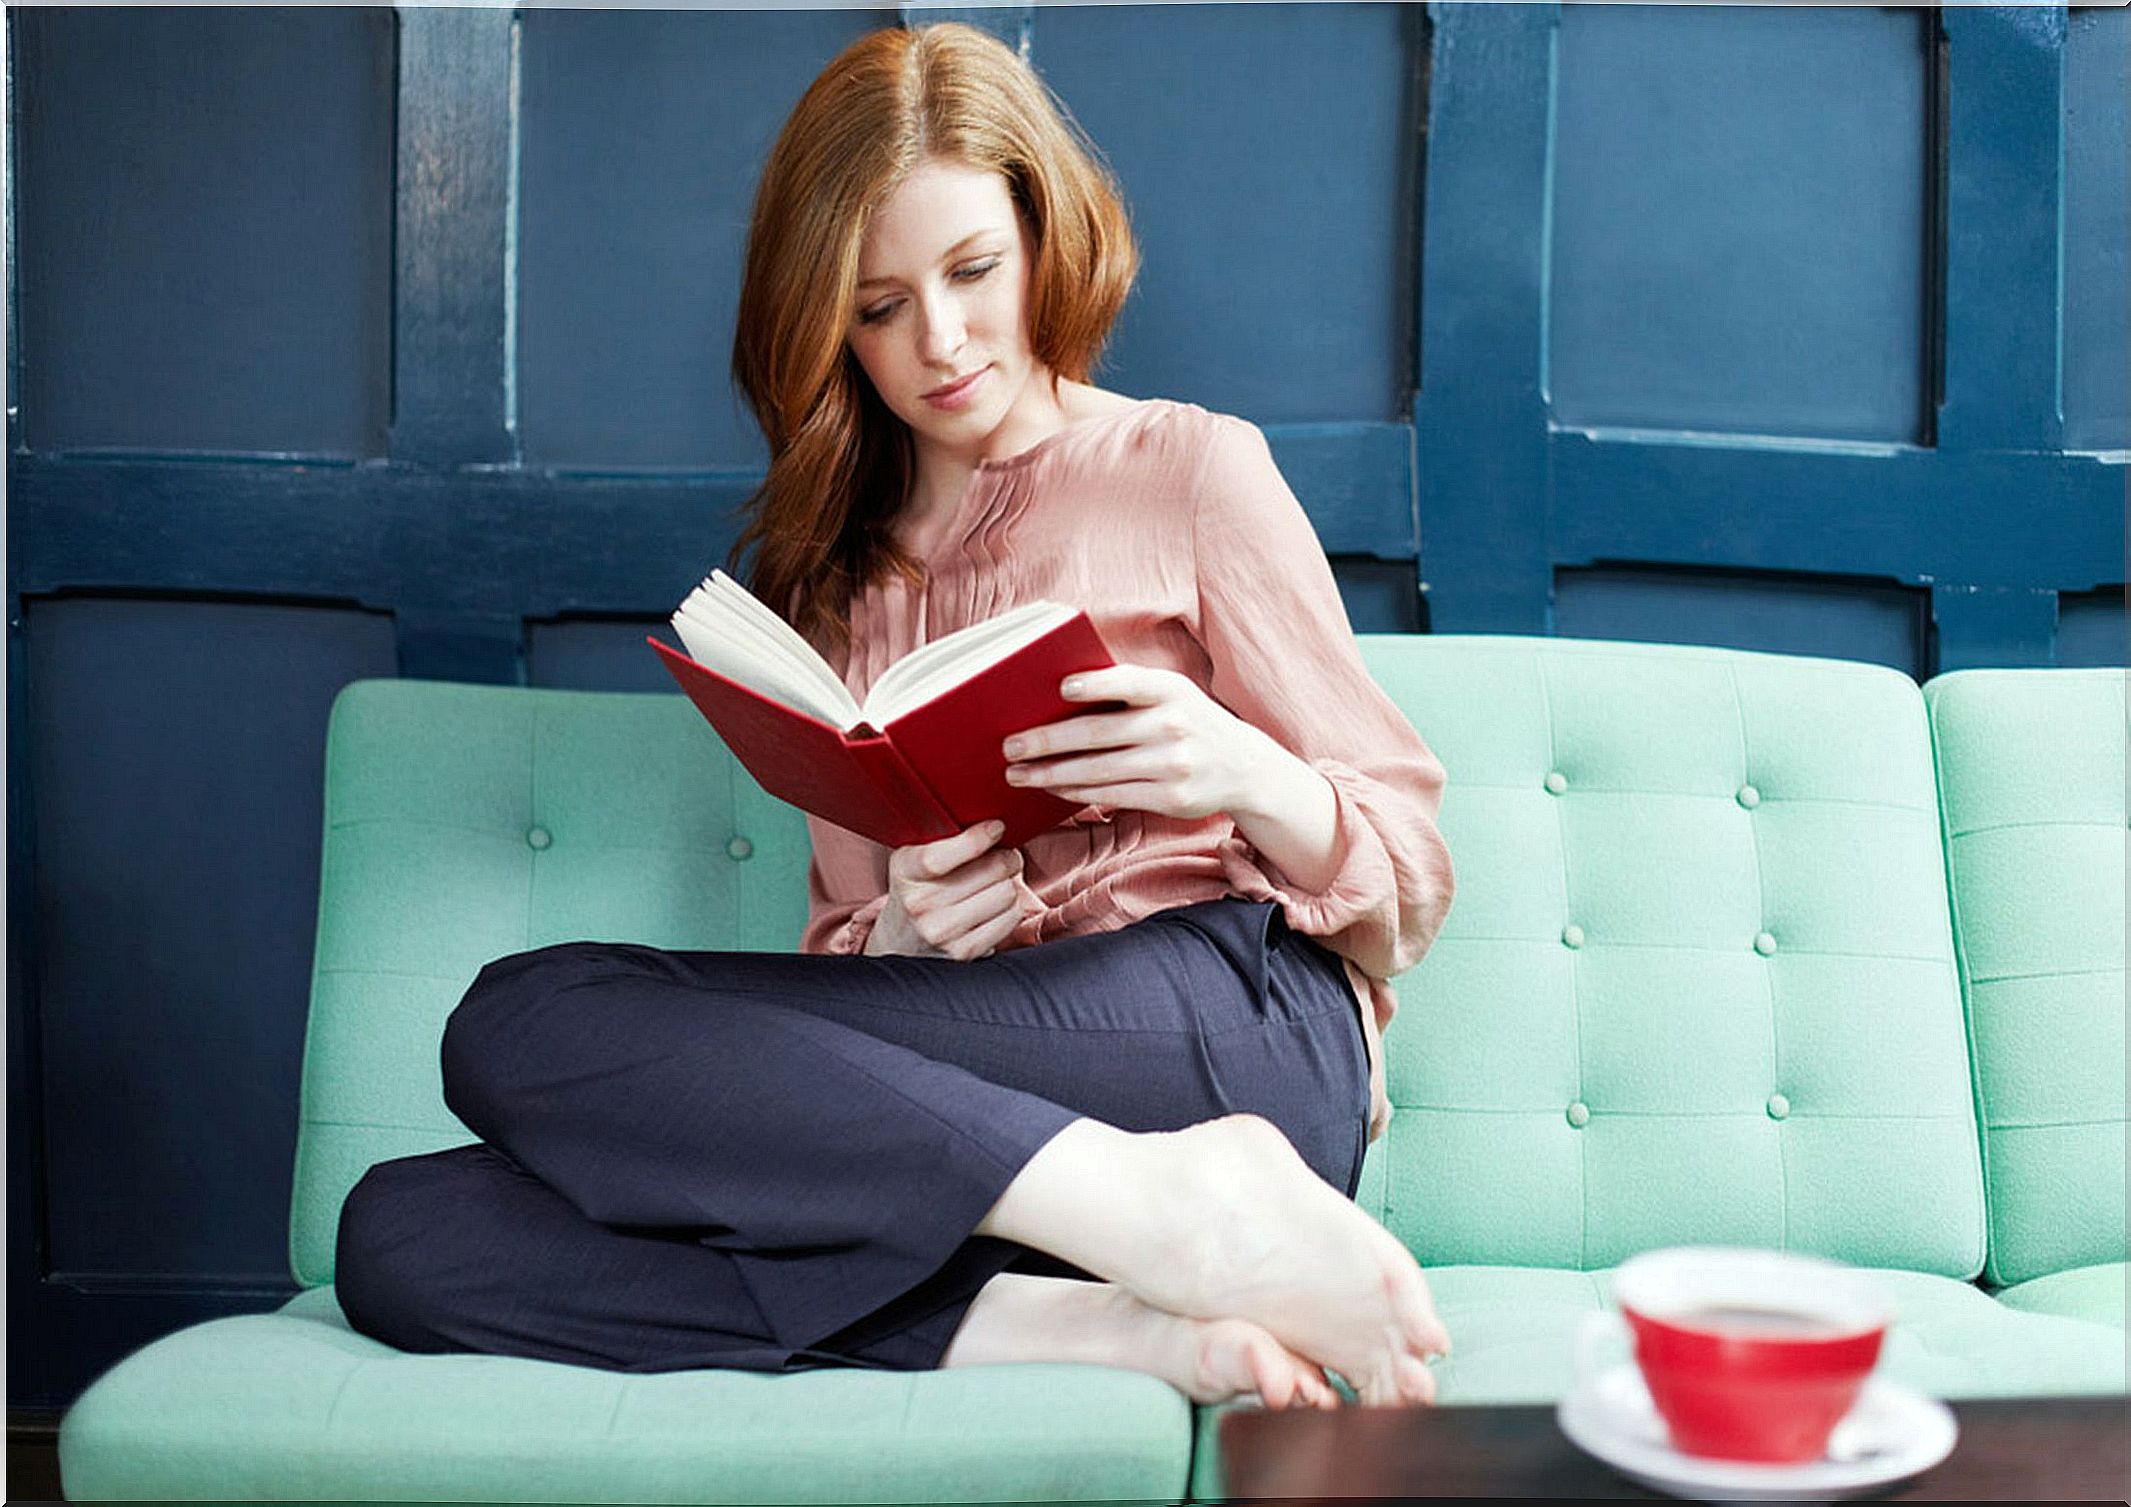 Woman reading a book sitting on a sofa.